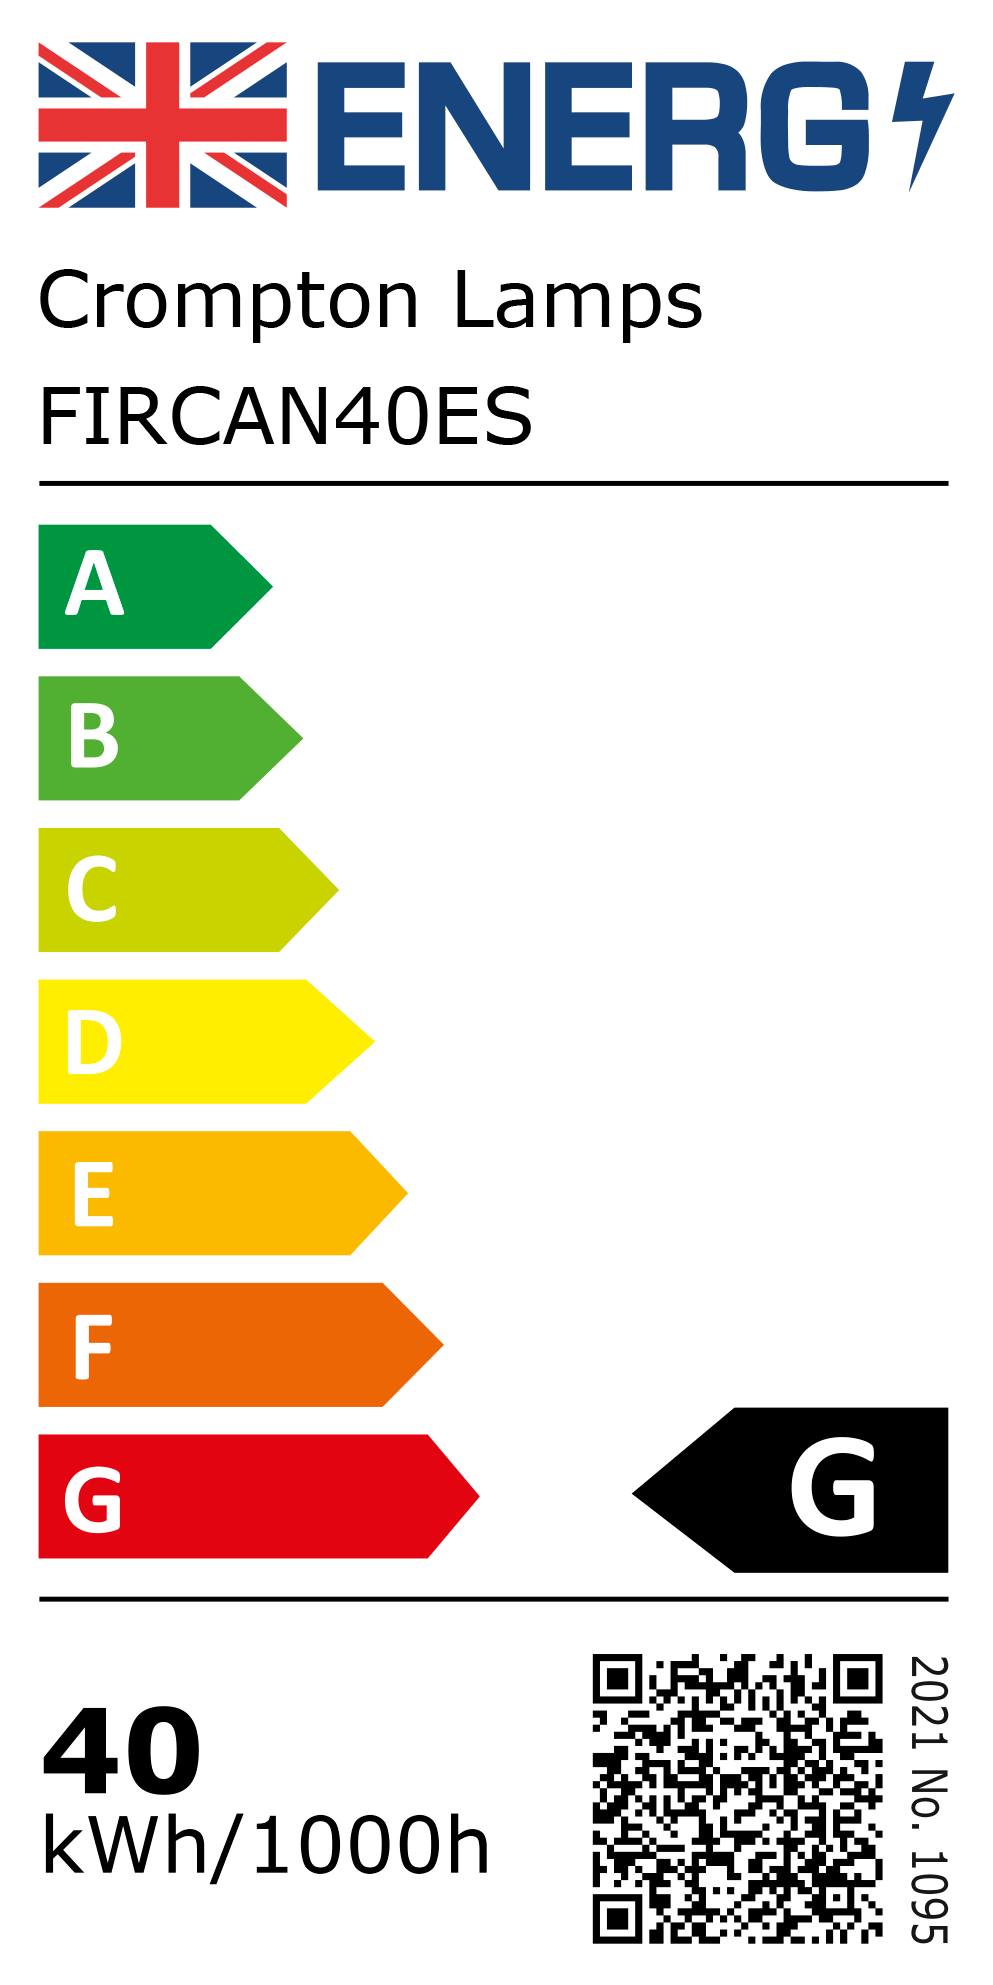 New 2021 Energy Rating Label: Stock Code FIRCAN40ES